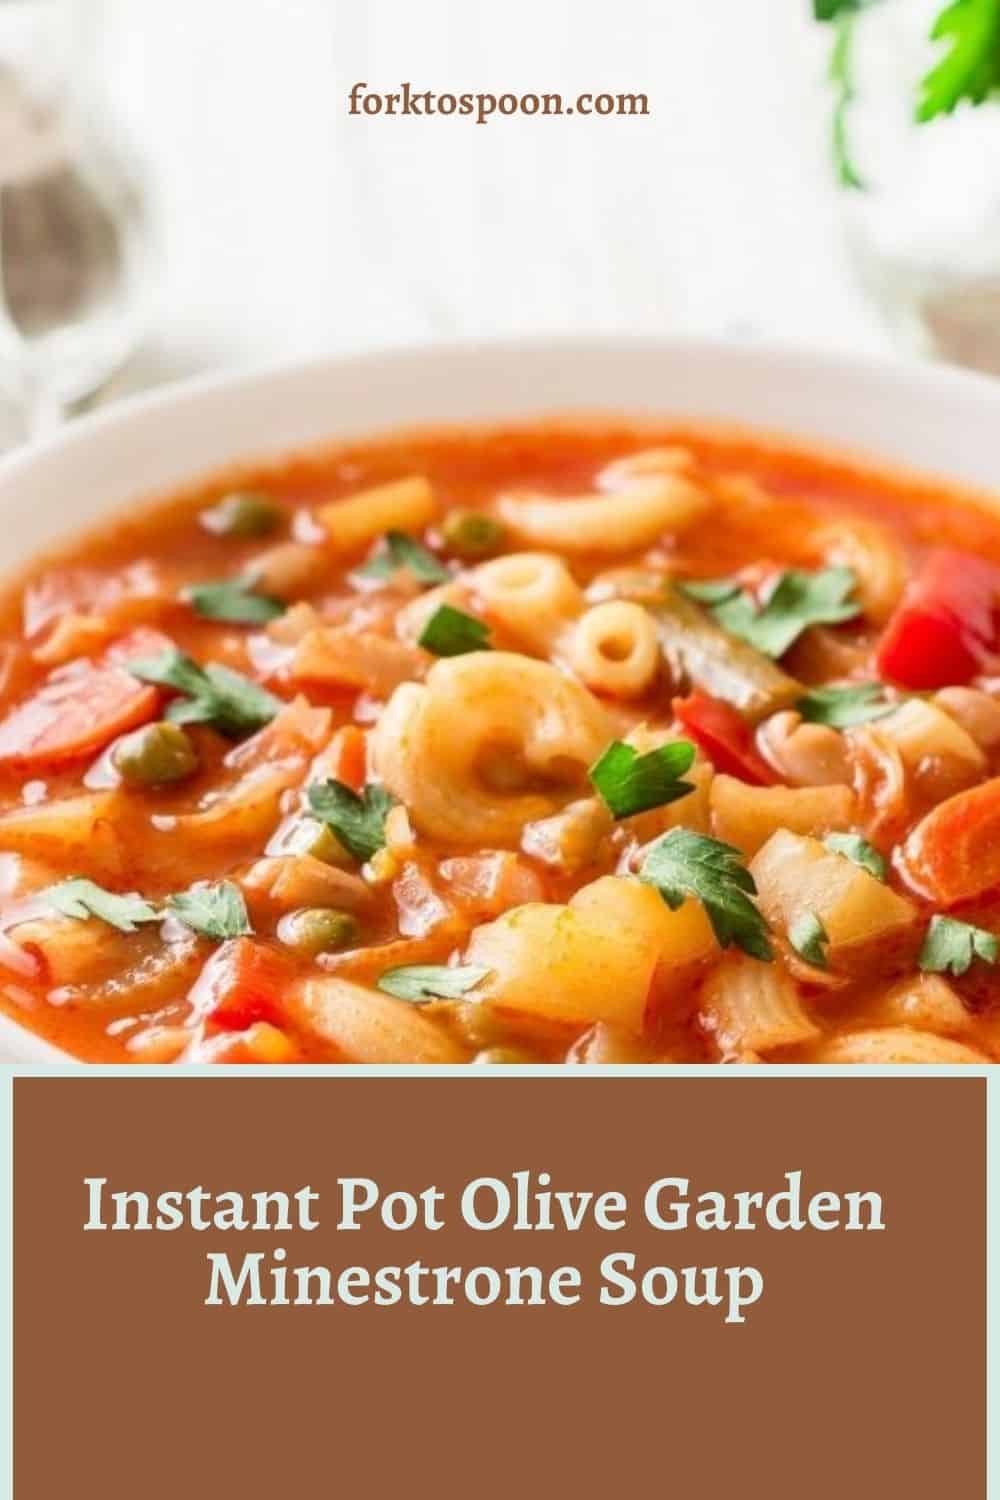 Pin for later for this recipe. There is an image of the Minestrone Soup filled with vegetables and pasta. The text on the pin reads 'Instant Pot Olive Garden Minestrone Soup'.